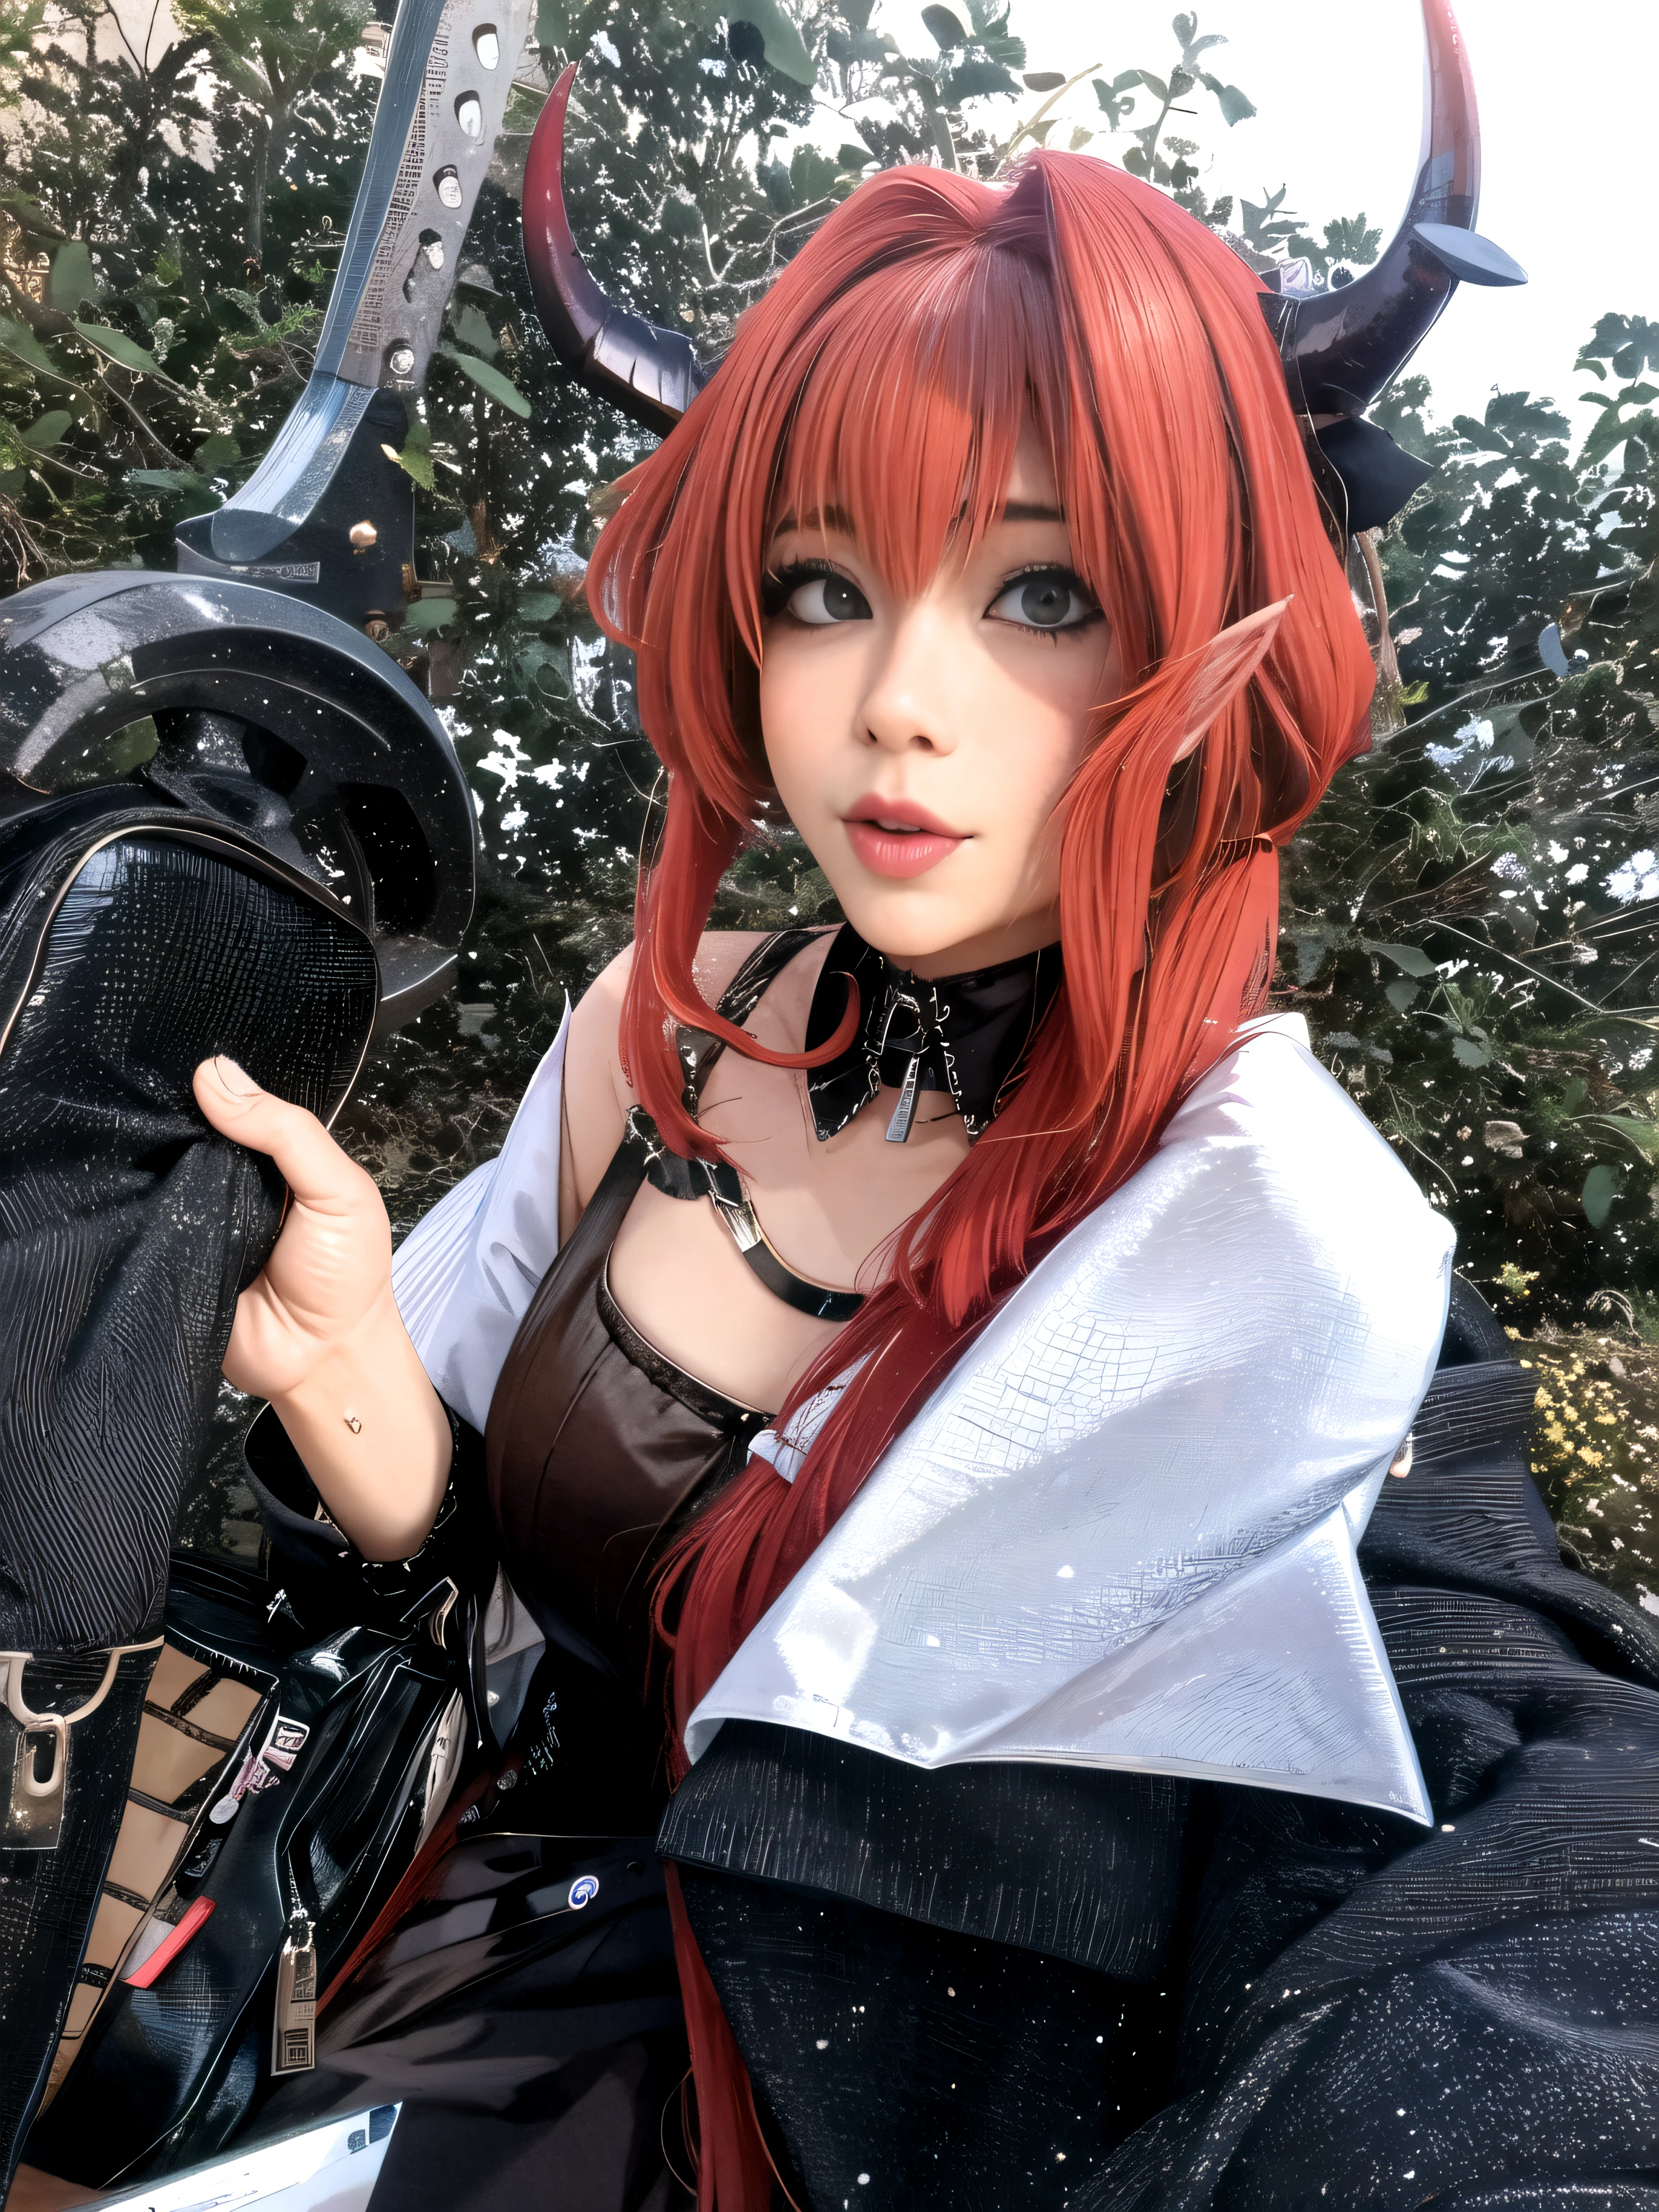 With red hair and horns、There is a woman carrying a bag, anime girl Cosplay, anime Cosplay, Cosplay, Rias Gremory, Cosplayer, Cosplay photo, sakimichan, Kanriu 666, professional Cosplay, Gothic Maiden Anime Girl, full-Cosplay, Devil Anime Girl, From Arknights, Real life anime girls, 8k))